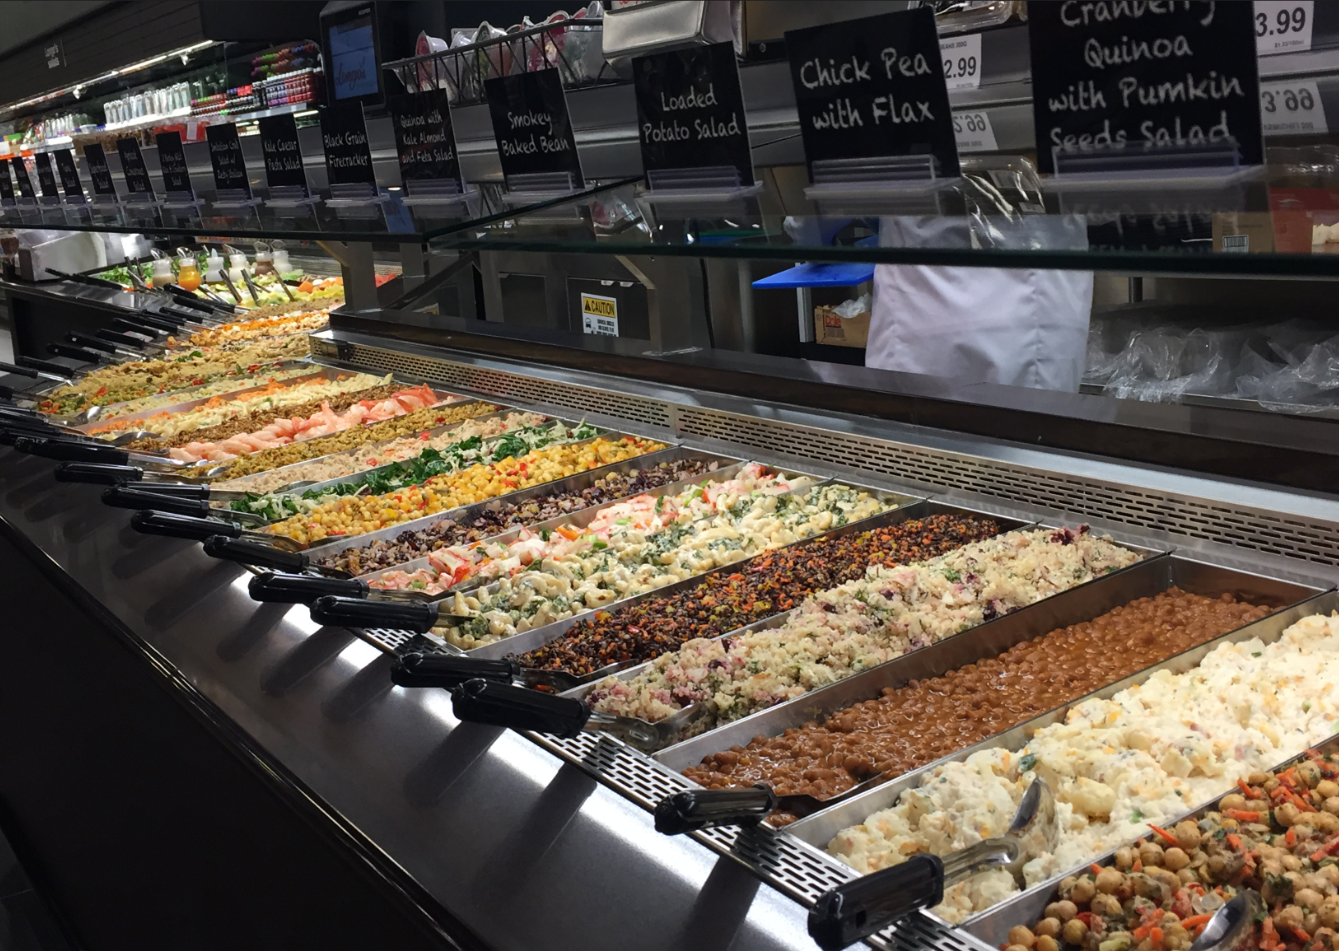 Gallery - Longo's opens 29th store in Greater Toronto Area ...